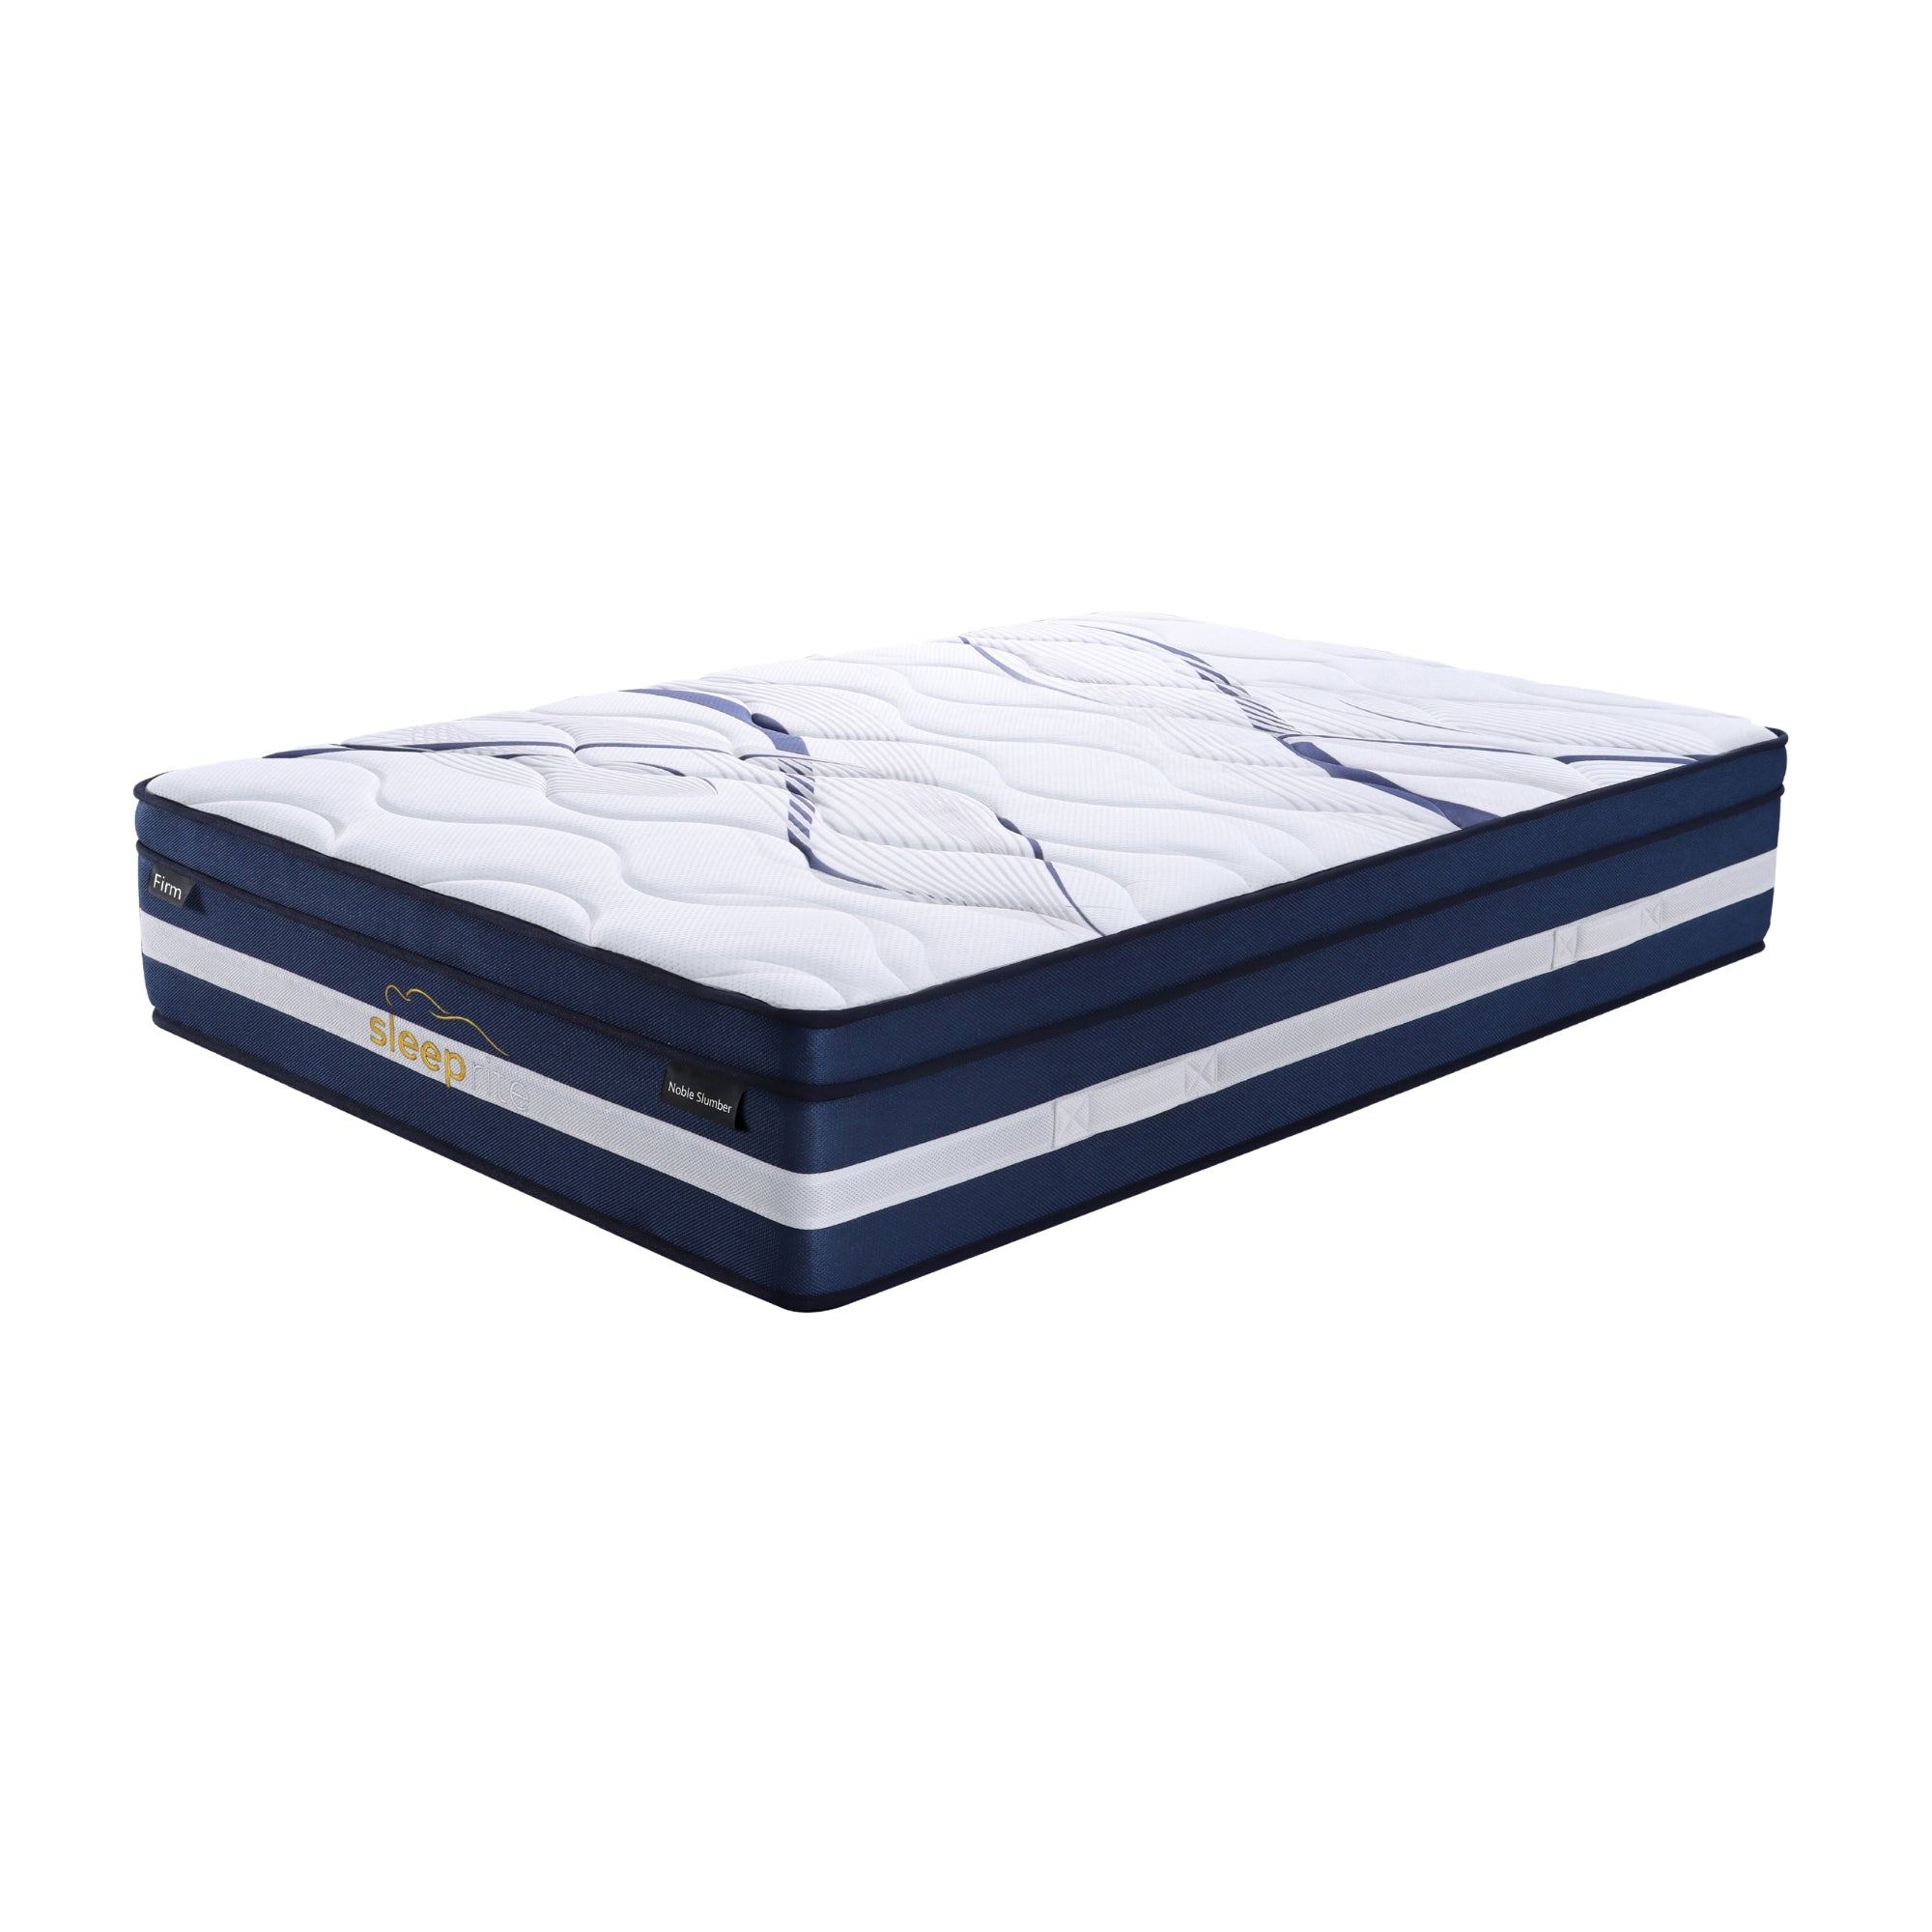 Firm, 28cm Thick 5 Zones Pocket Spring Double Mattress - Noble Slumber